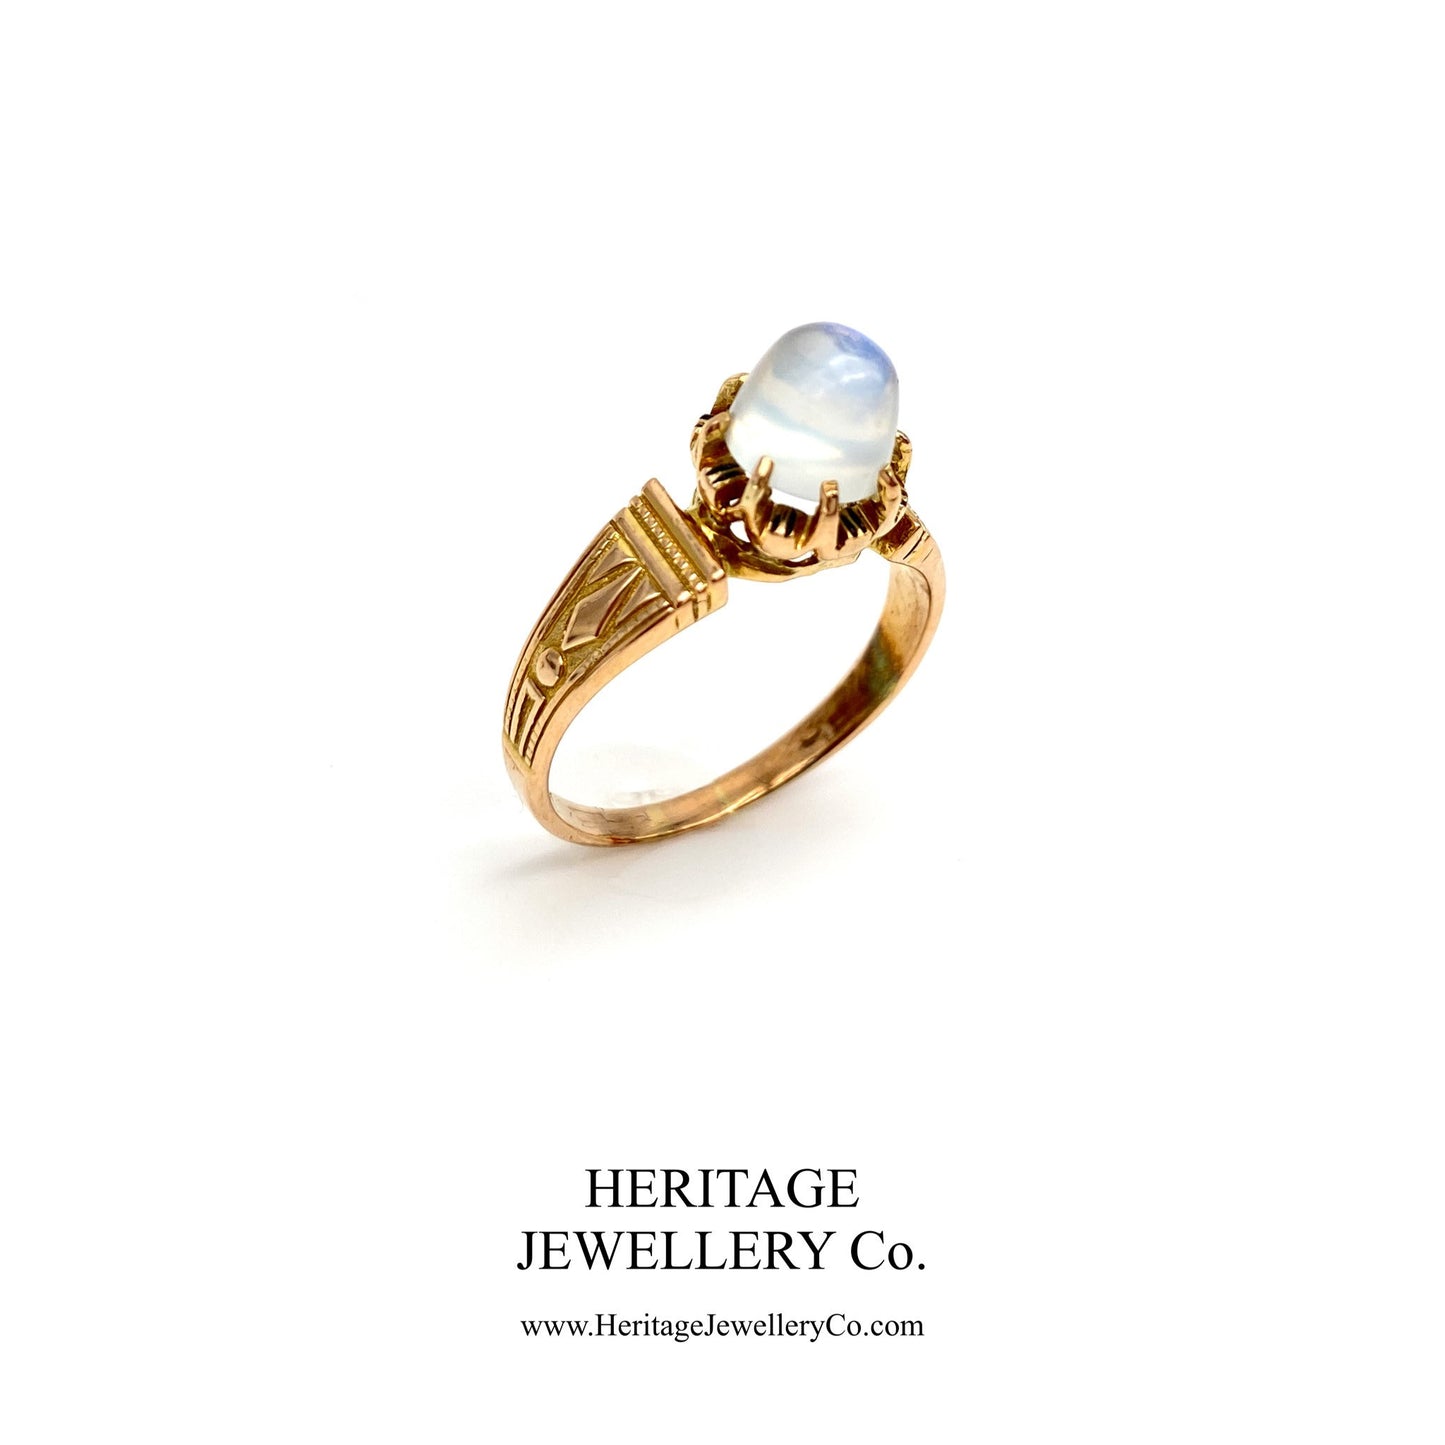 Early Victorian Cabochon Moonstone Ring (c. 1847)